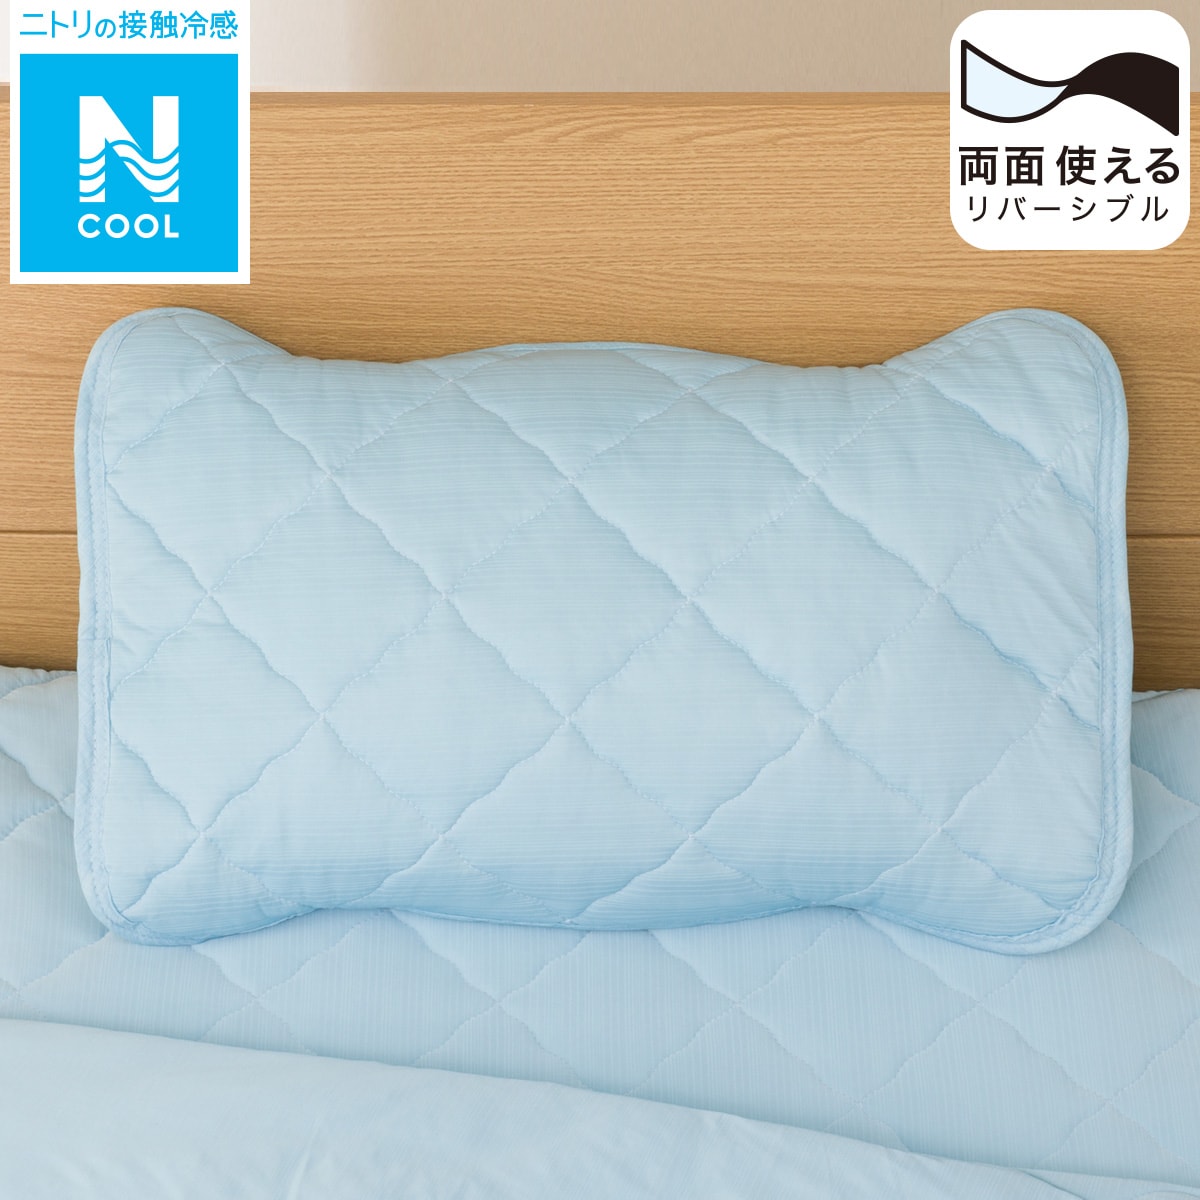 Natural-fit pillow for side sleeping Natural posture less burden Nitori  Japan